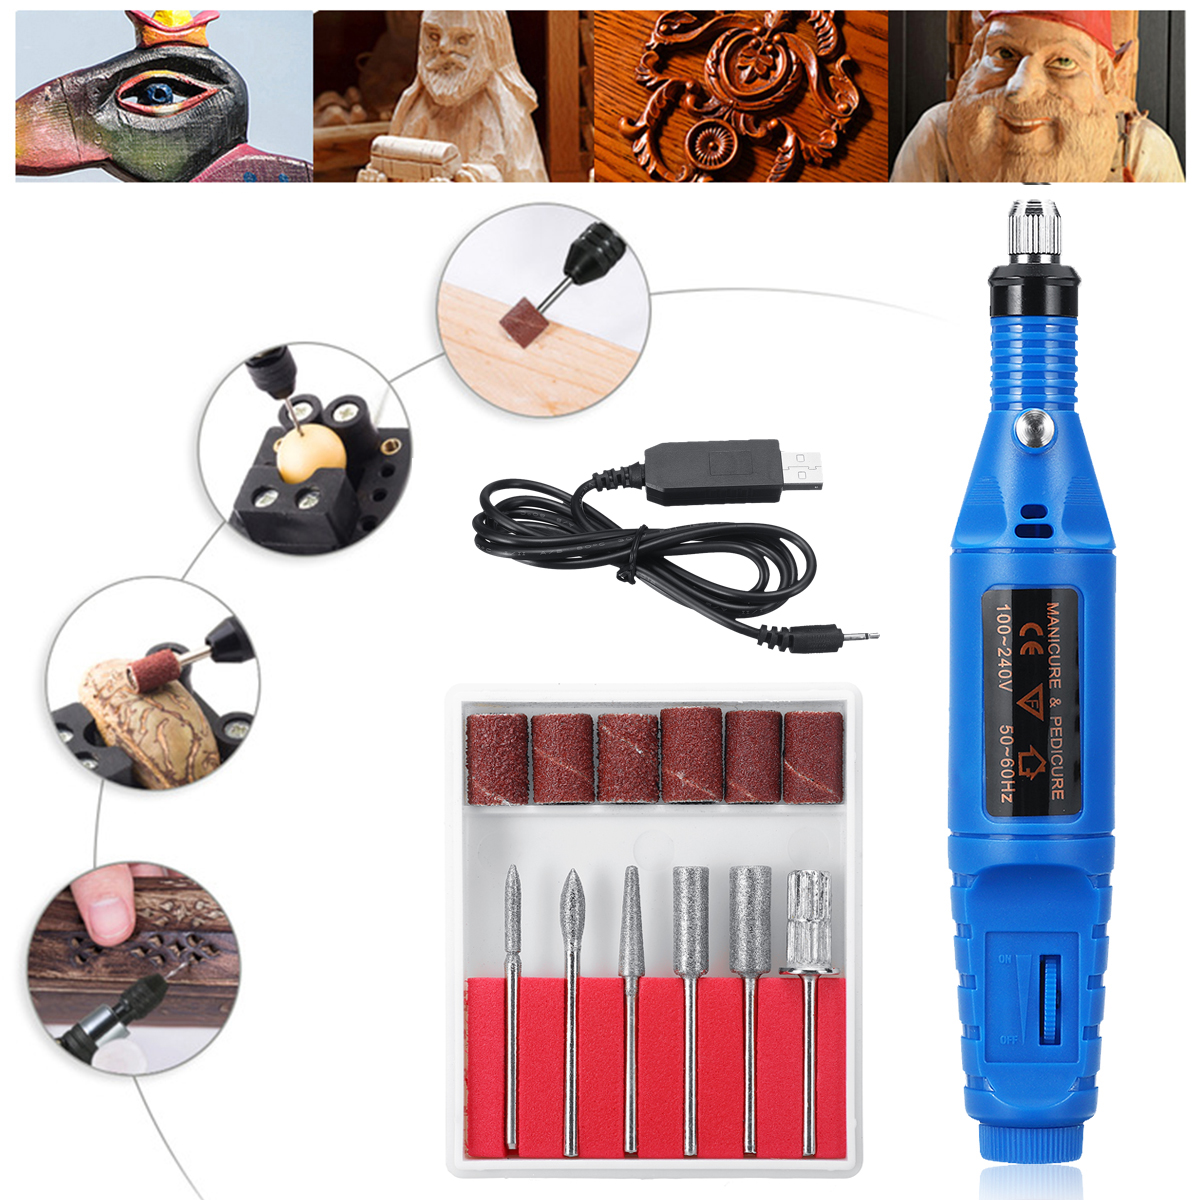 

USB Mini Electric Grinder Engraving Pen Milling Rotary Drill Grinder Tool Milling Polishing Drilling Cutting Engraving Tool